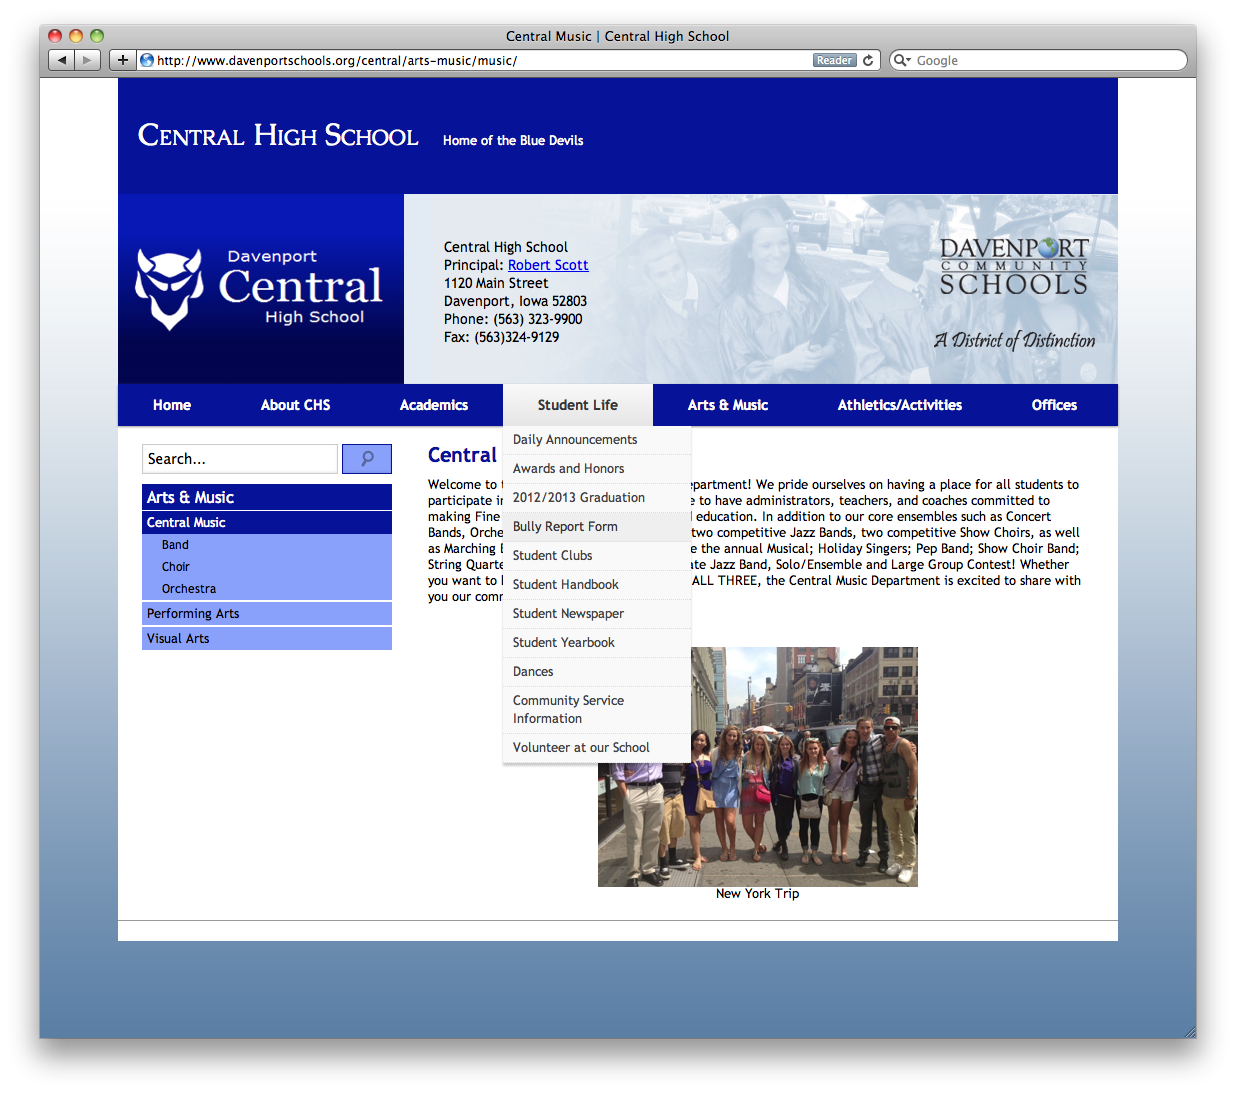 Davenport Central High School Home Page